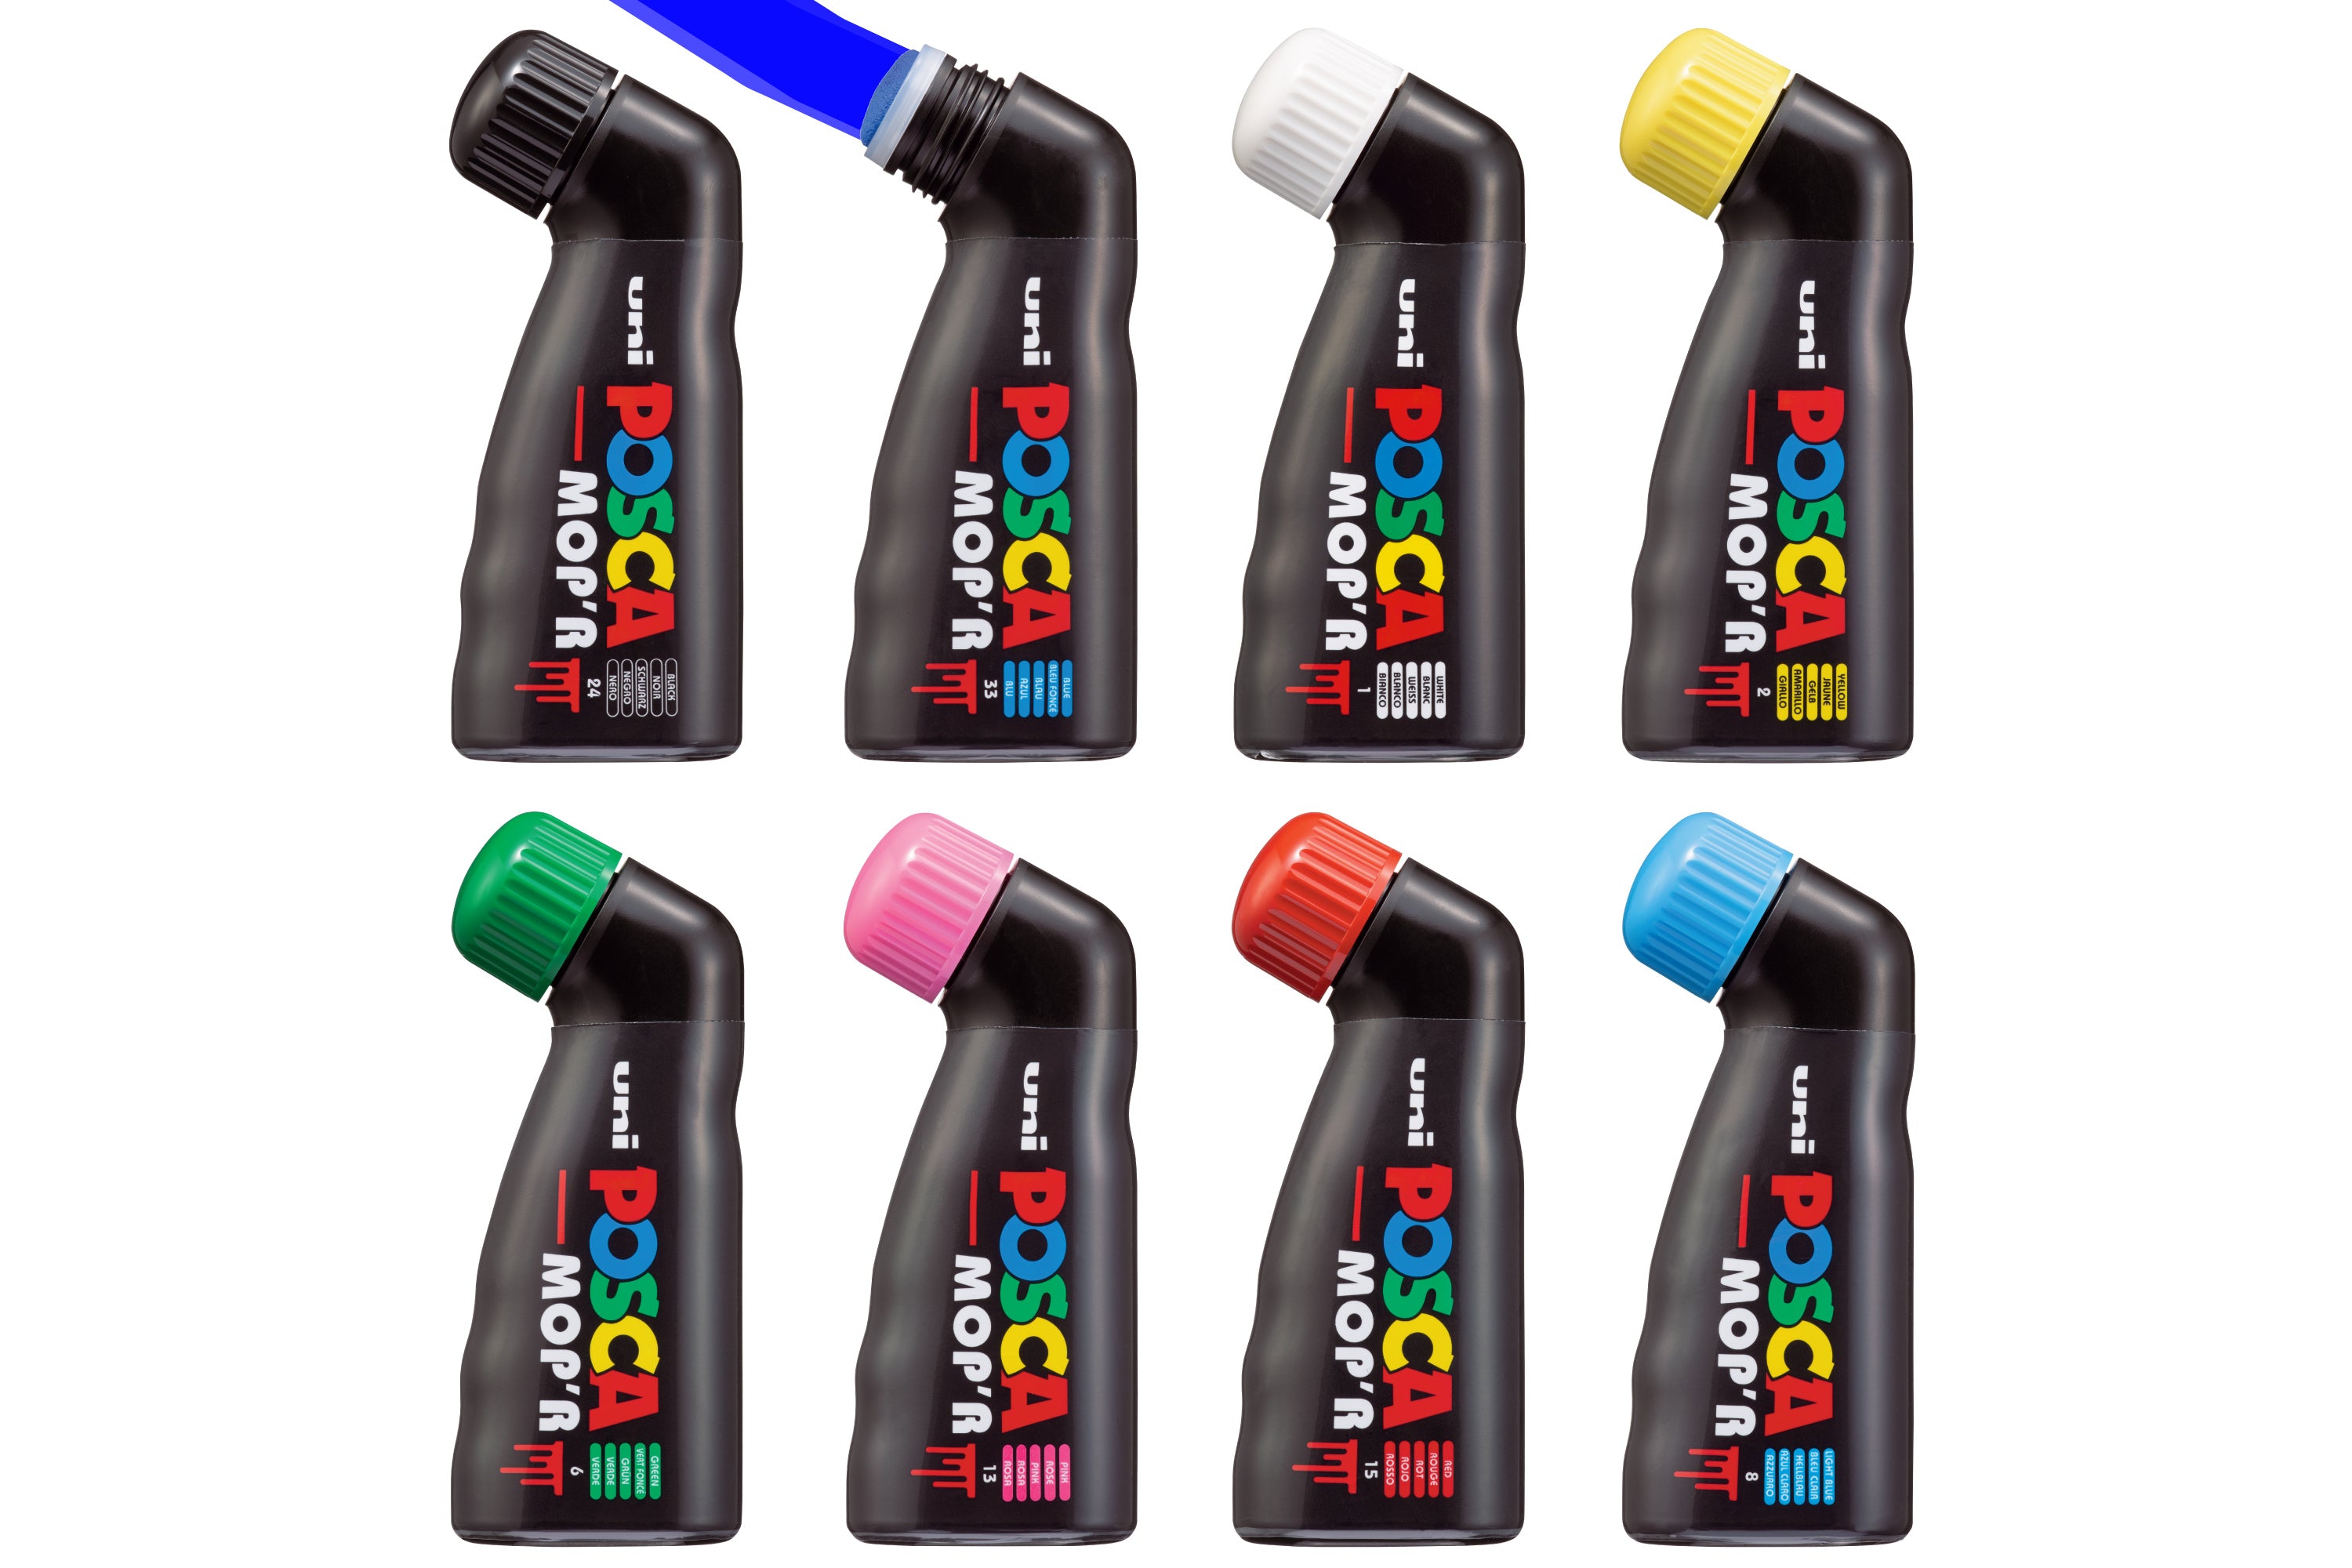 Uni Posca Mop'r Paint Marker PC-22 - Black only for 12.95